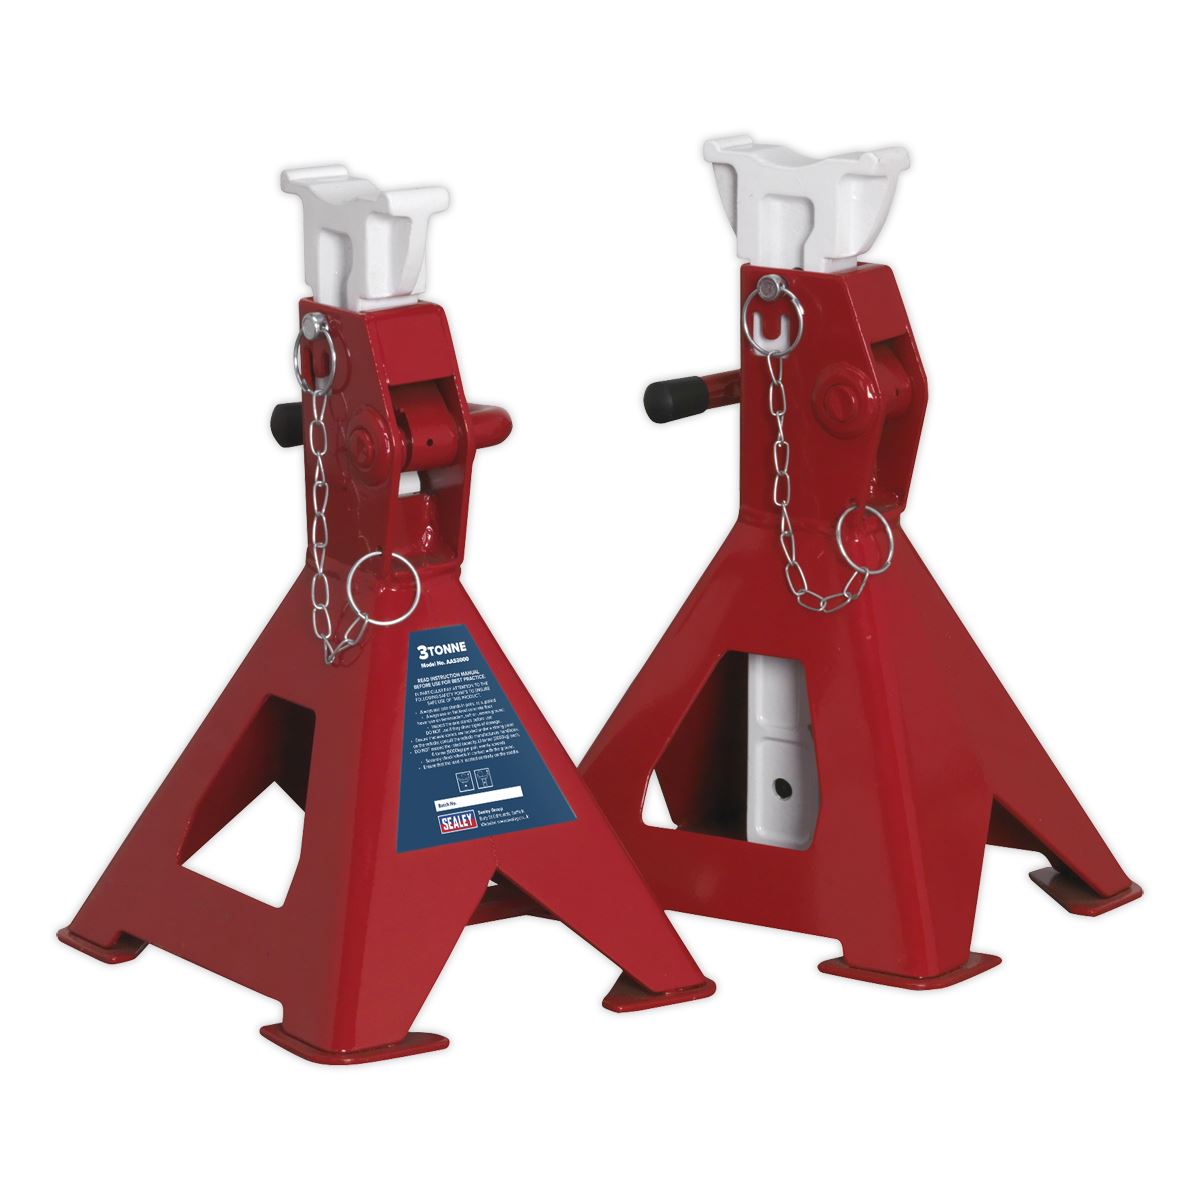 Sealey Axle Stands (Pair) 3tonne Capacity per Stand Auto Rise Ratchet